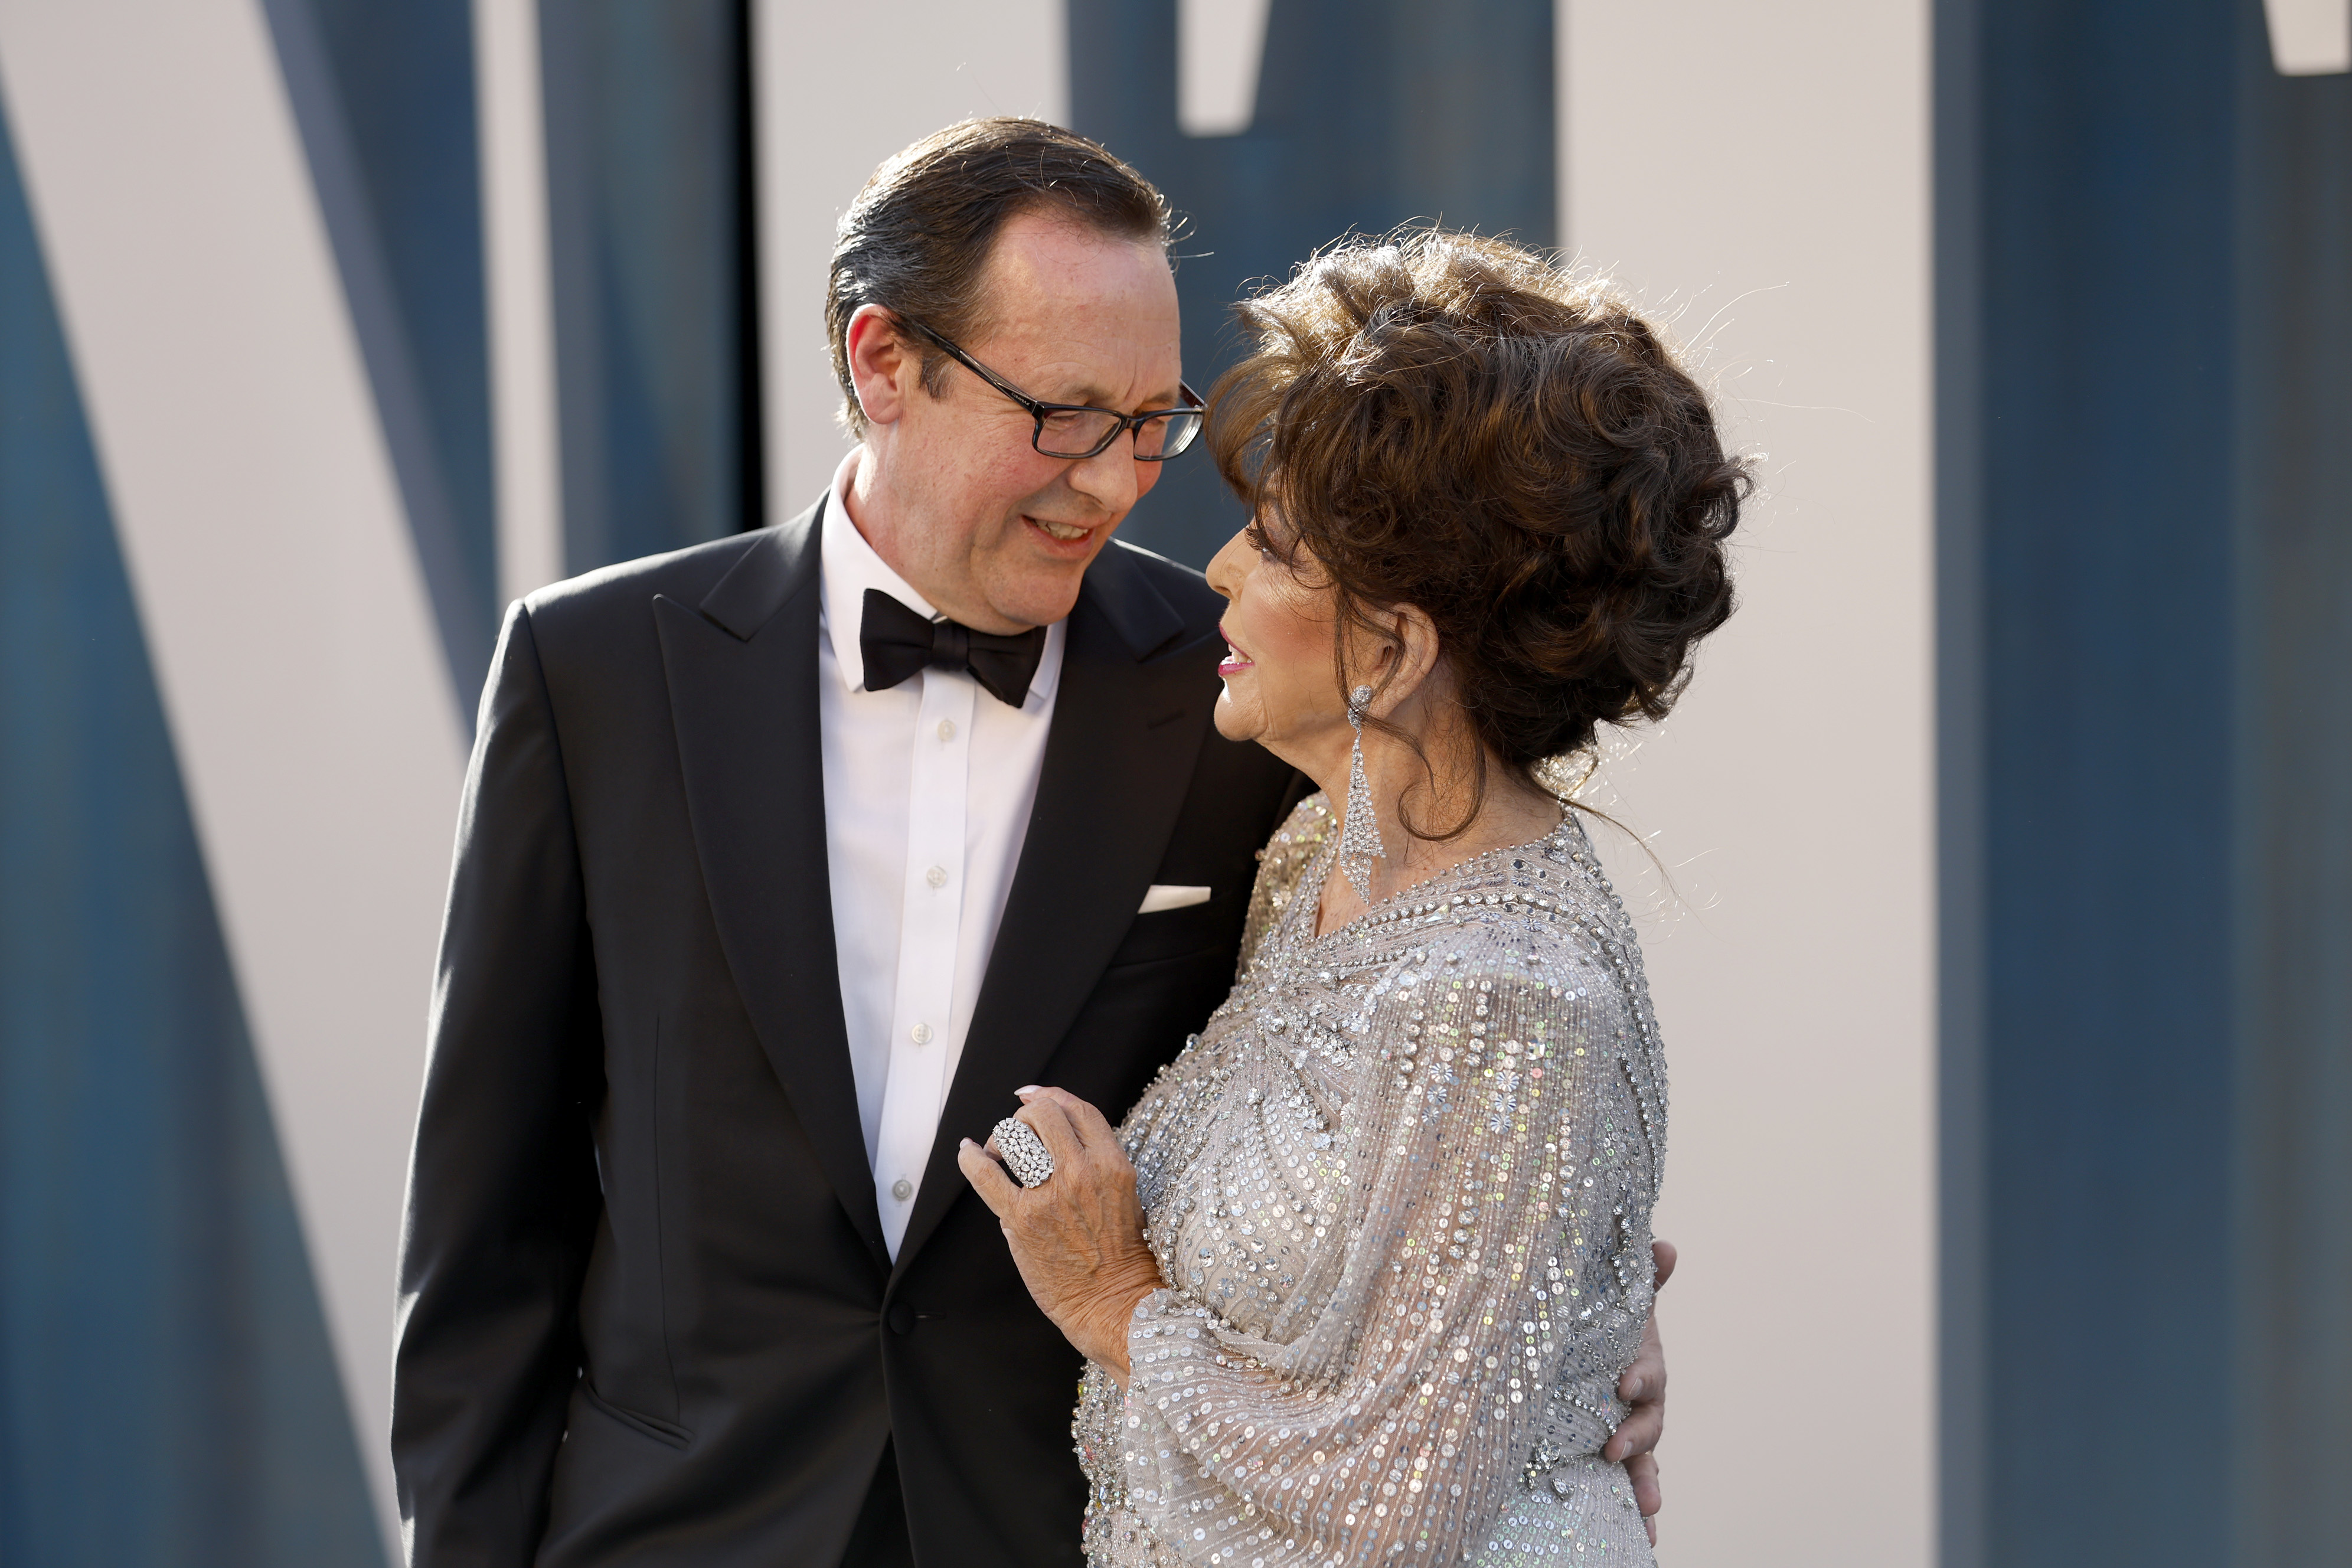 Percy Gibson and Joan Collins at the 2022 Vanity Fair Oscar Party hosted by Radhika Jones at Wallis Annenberg Center for the Performing Arts on March 27, 2022 in Beverly Hills, California | Source: Getty Images